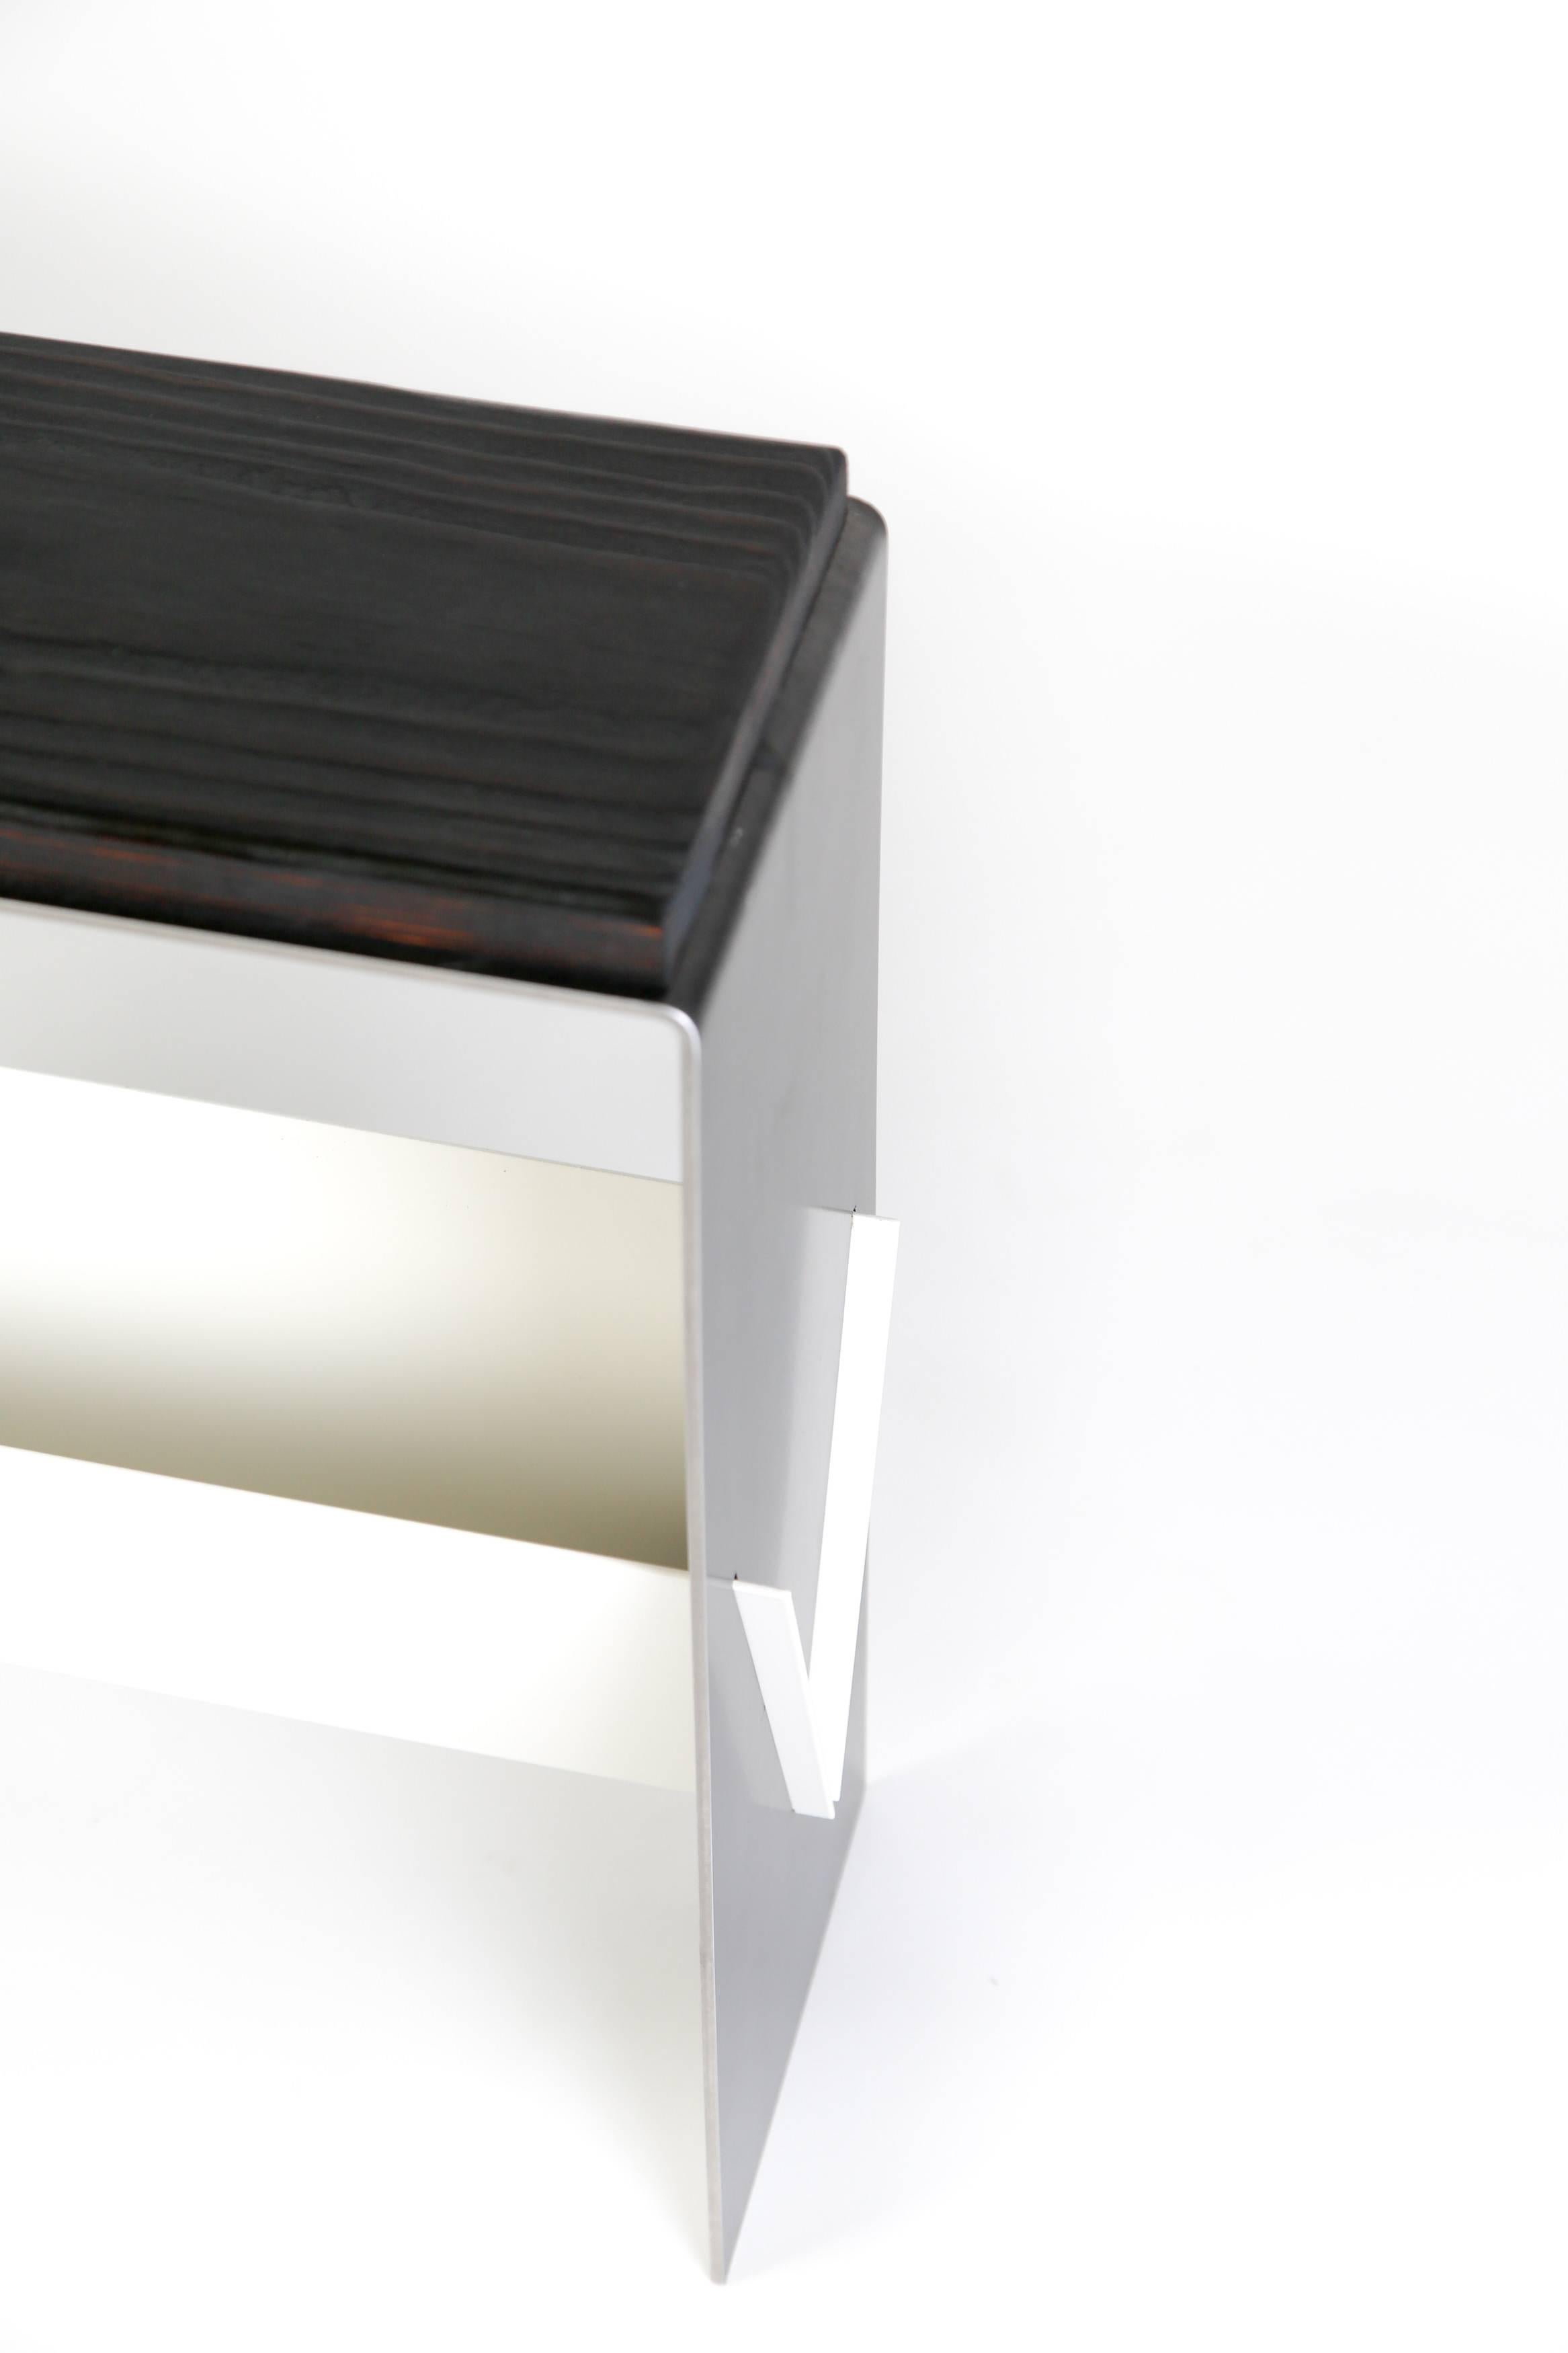 Hand-Crafted The V Table, a Combination of Reclaimed Fir and Powder Coated and Raw Steel For Sale